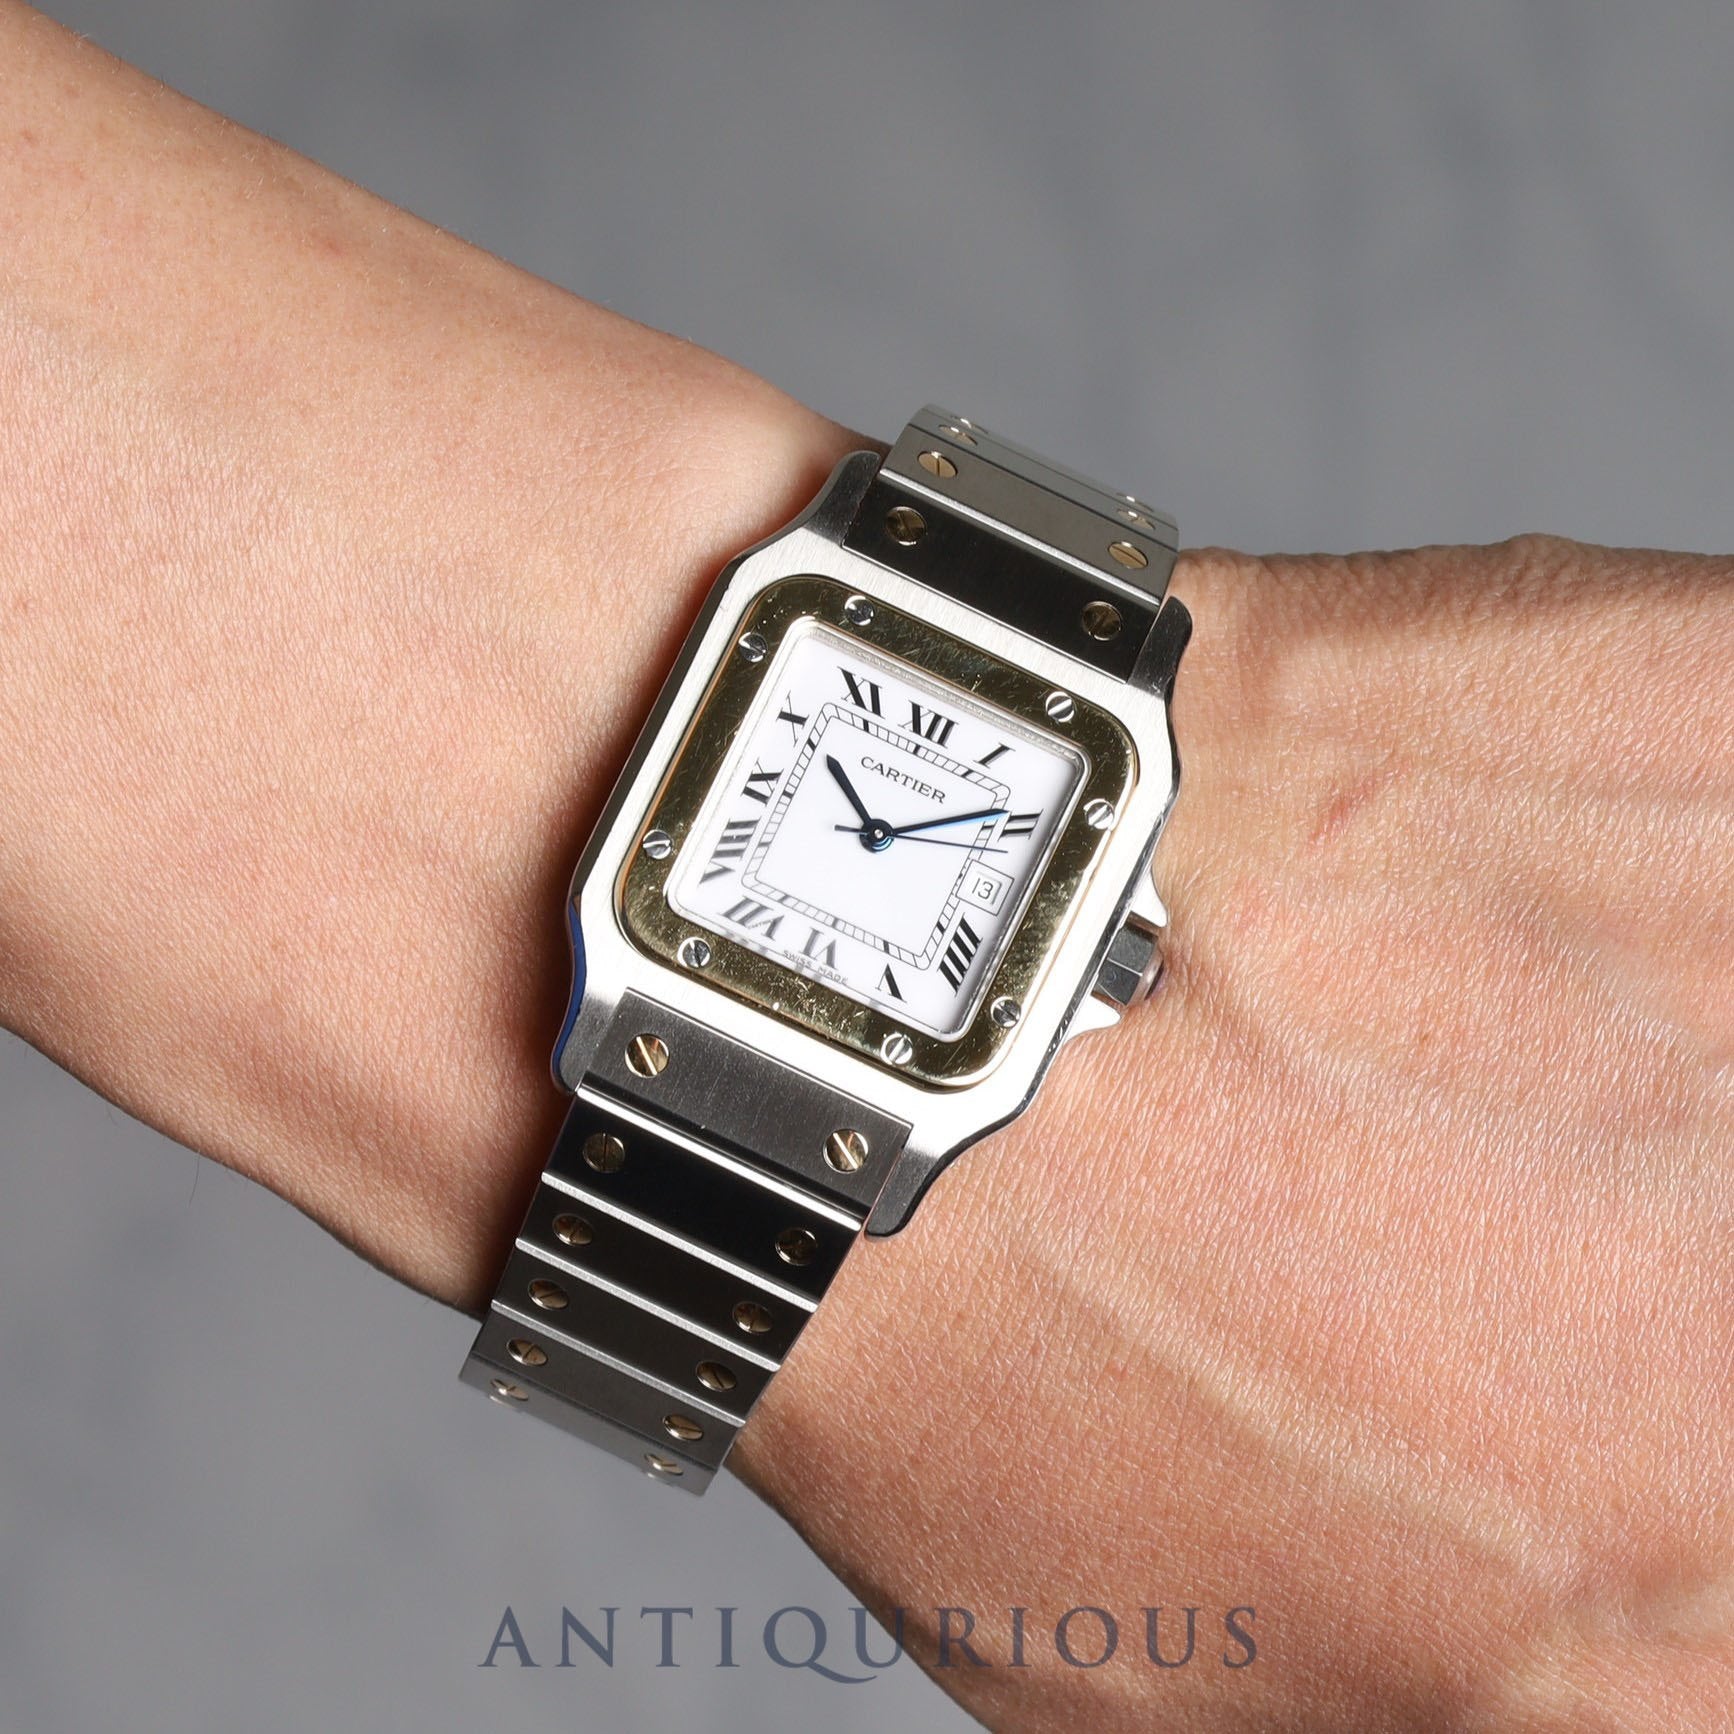 CARTIER SANTOS GALBEE LM AC 23.80 gr Automatic SS/YG SS/YG White Dial Cartier Boutique Complete Service